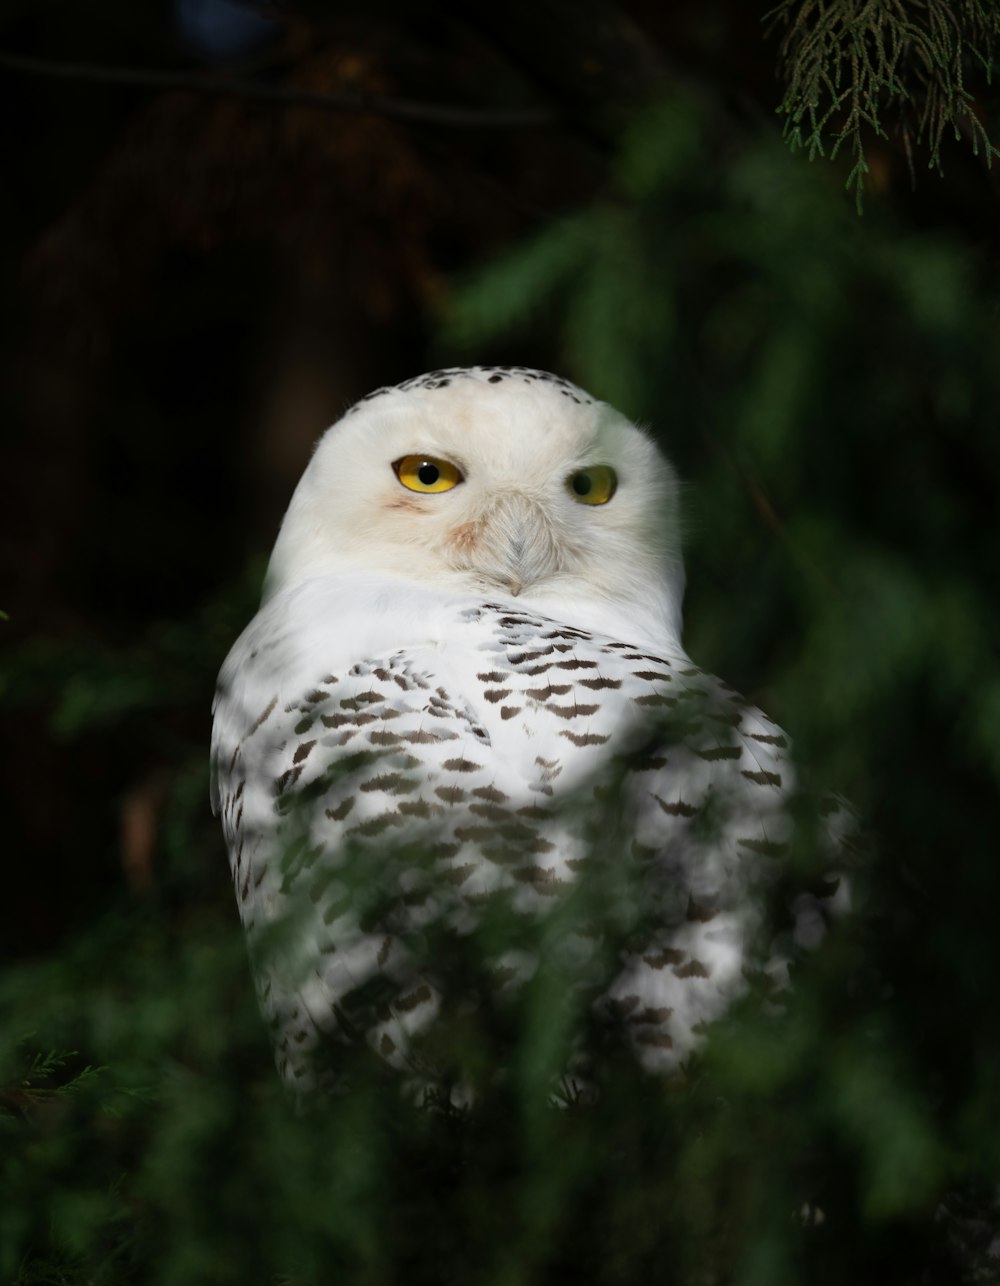 a white owl with yellow eyes sitting in a tree